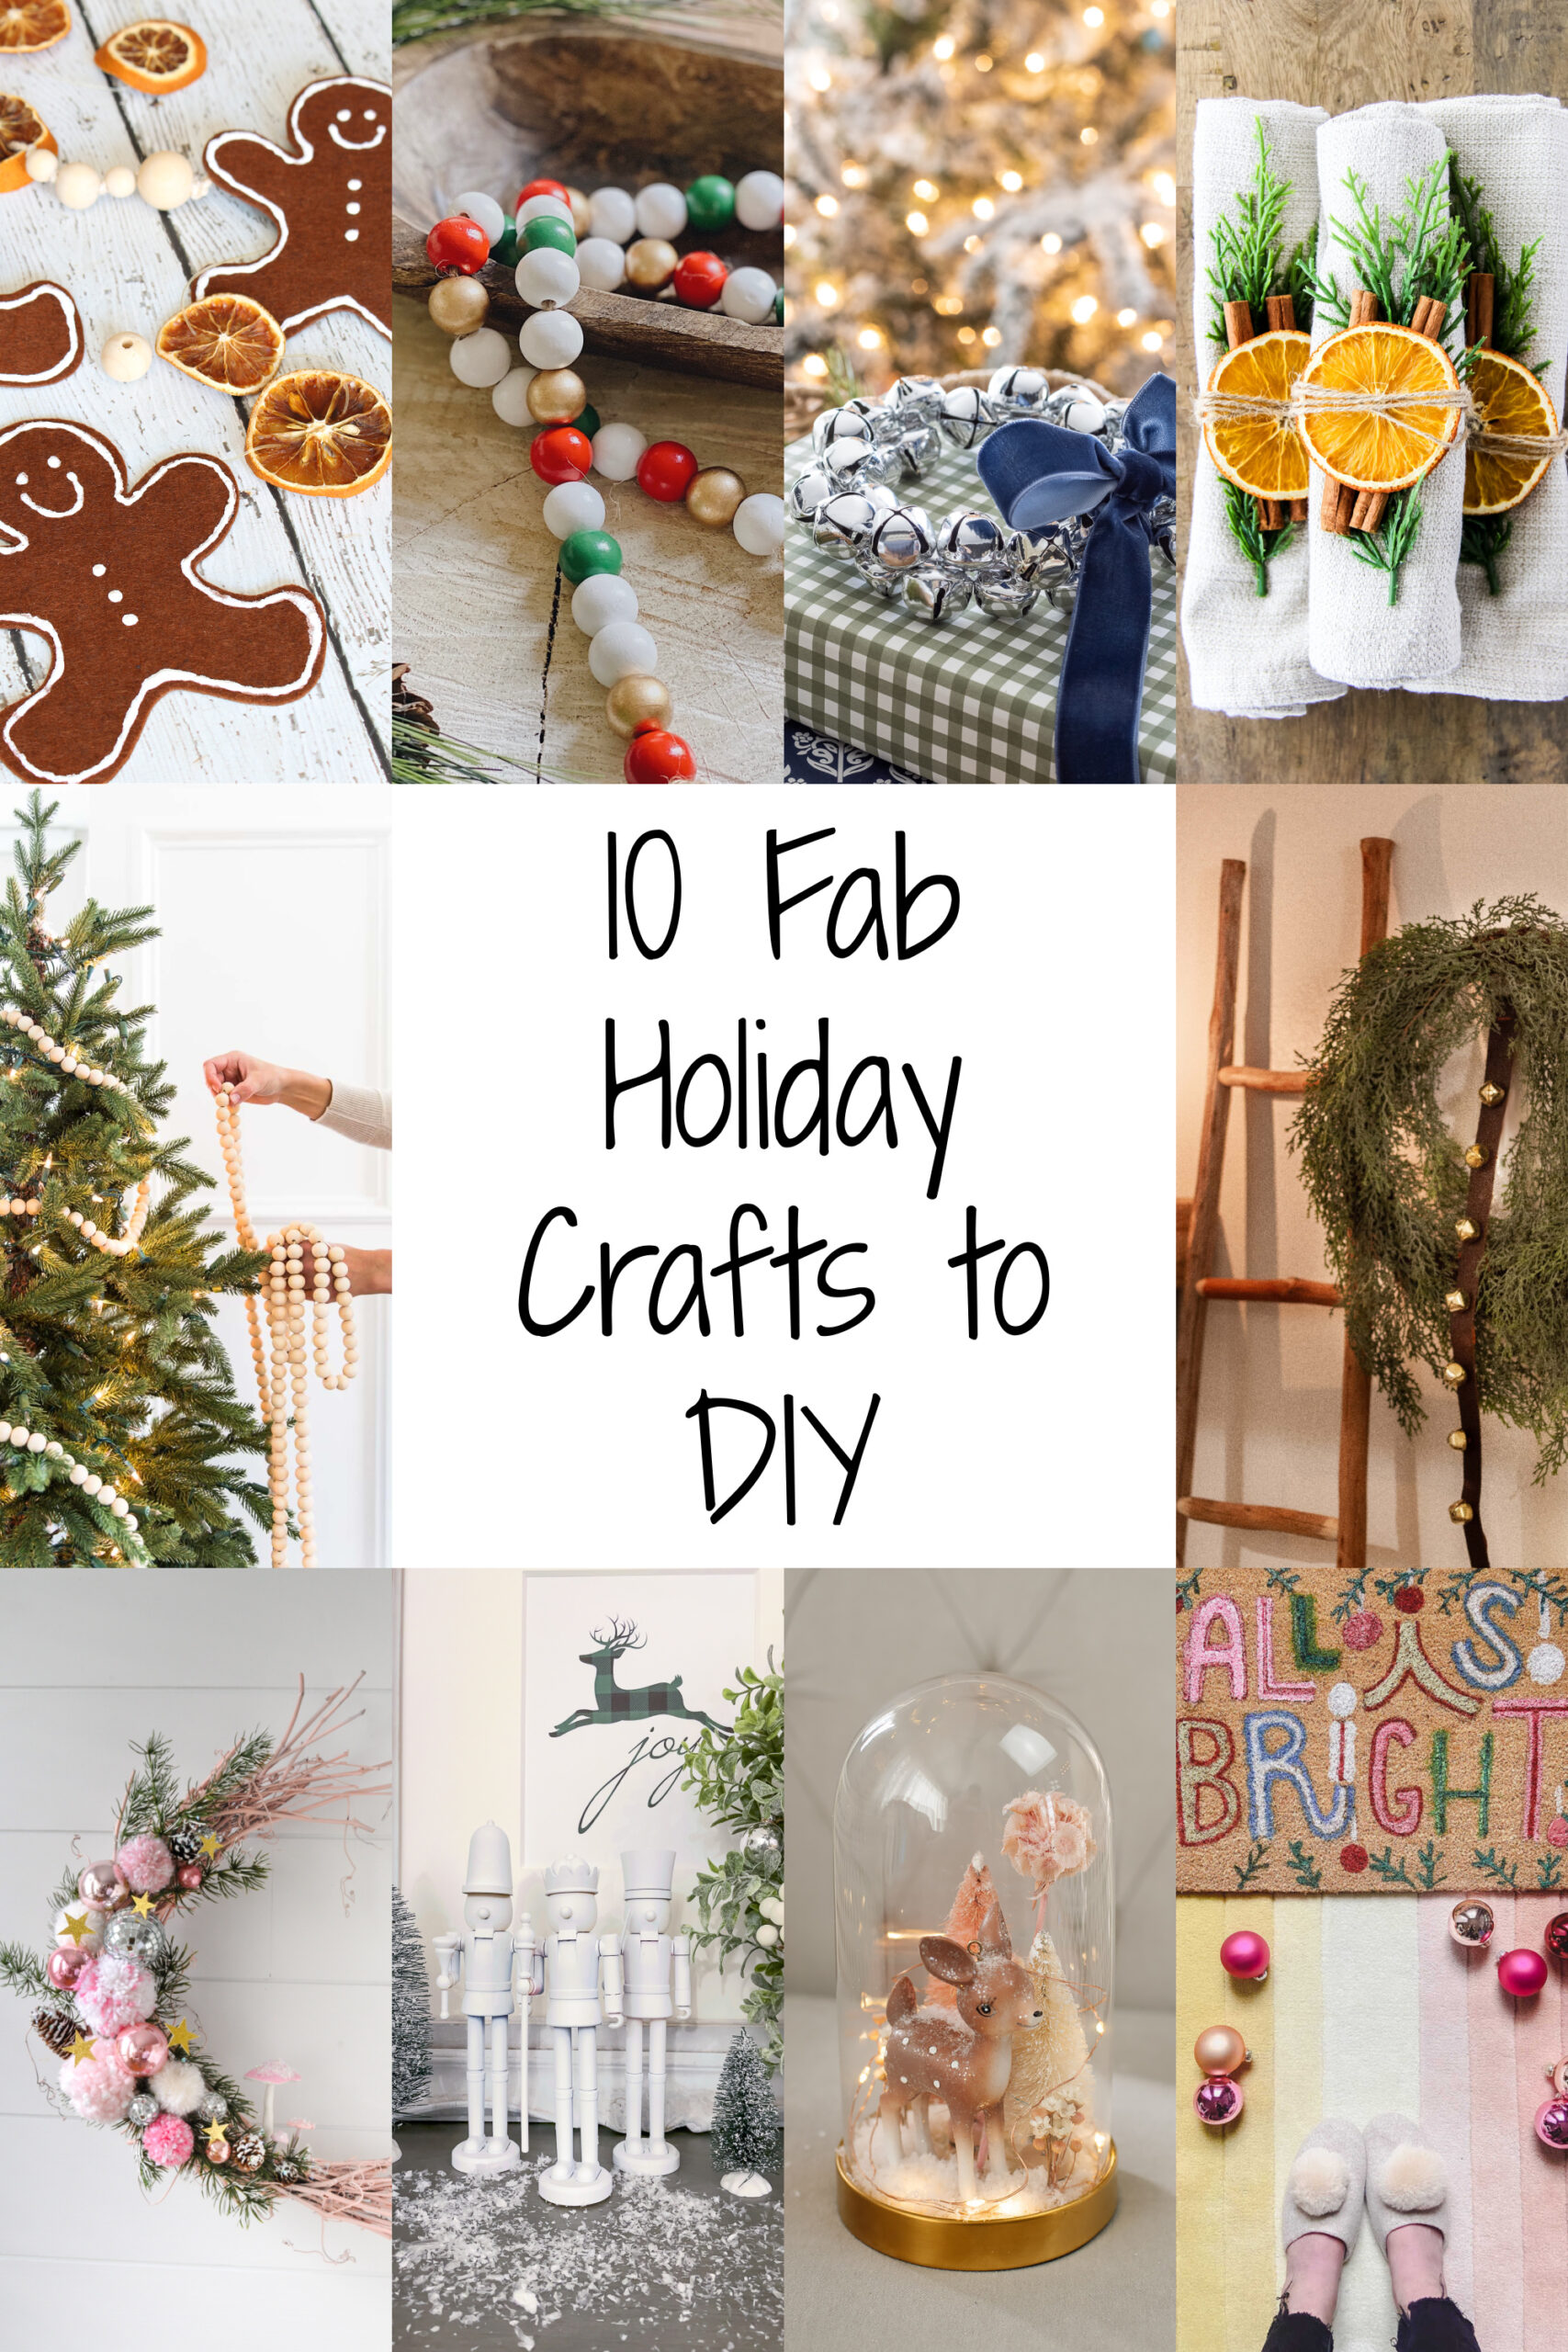 10 Fab Holiday Crafts To DIY graphic.